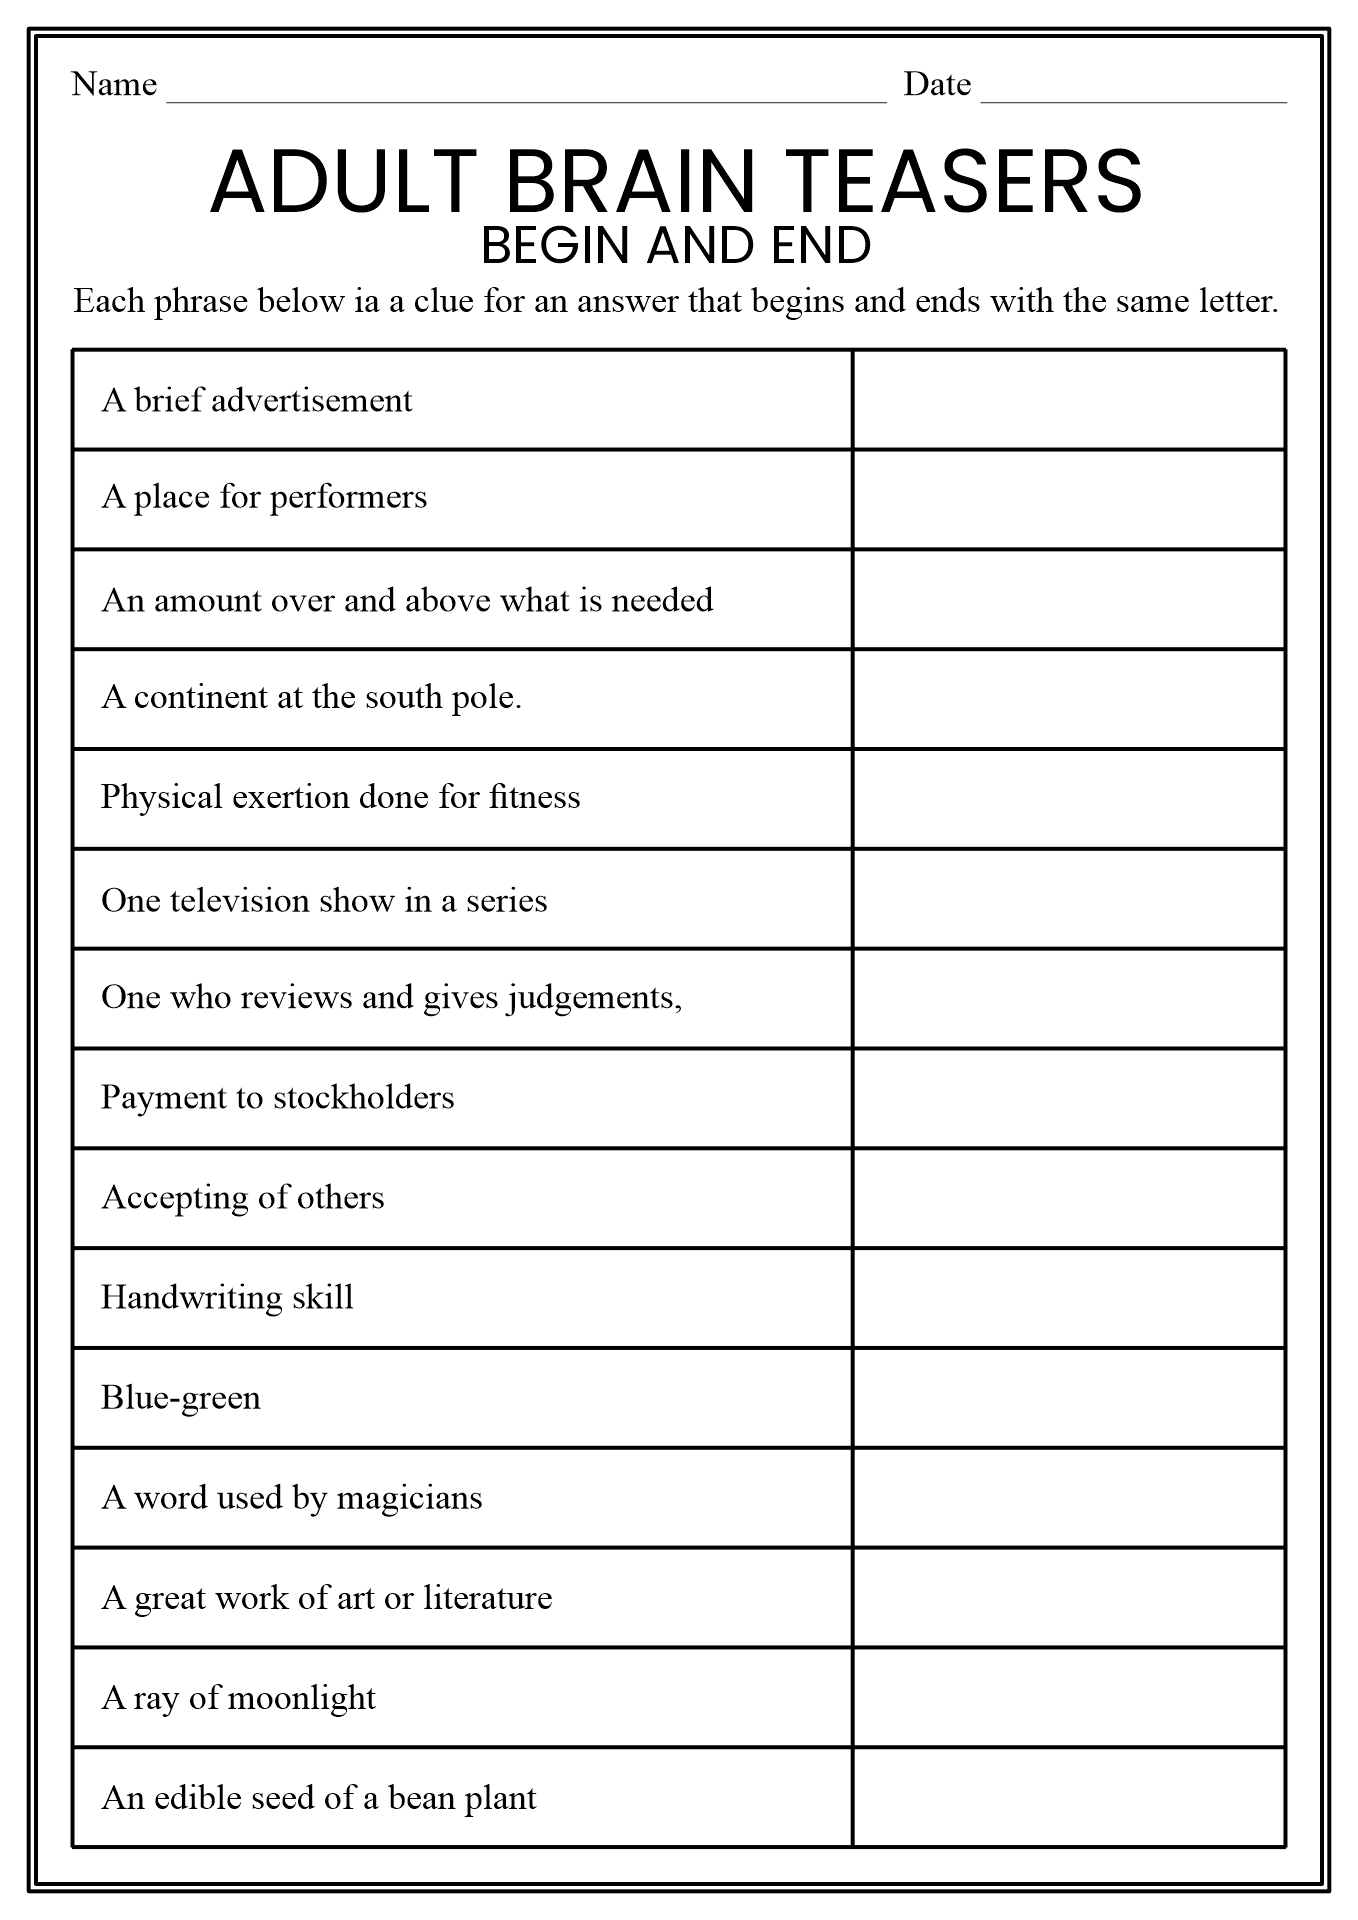 12 Best Images Of Riddles And Brain Teasers Worksheets Printable Brain Teasers Christmas Song